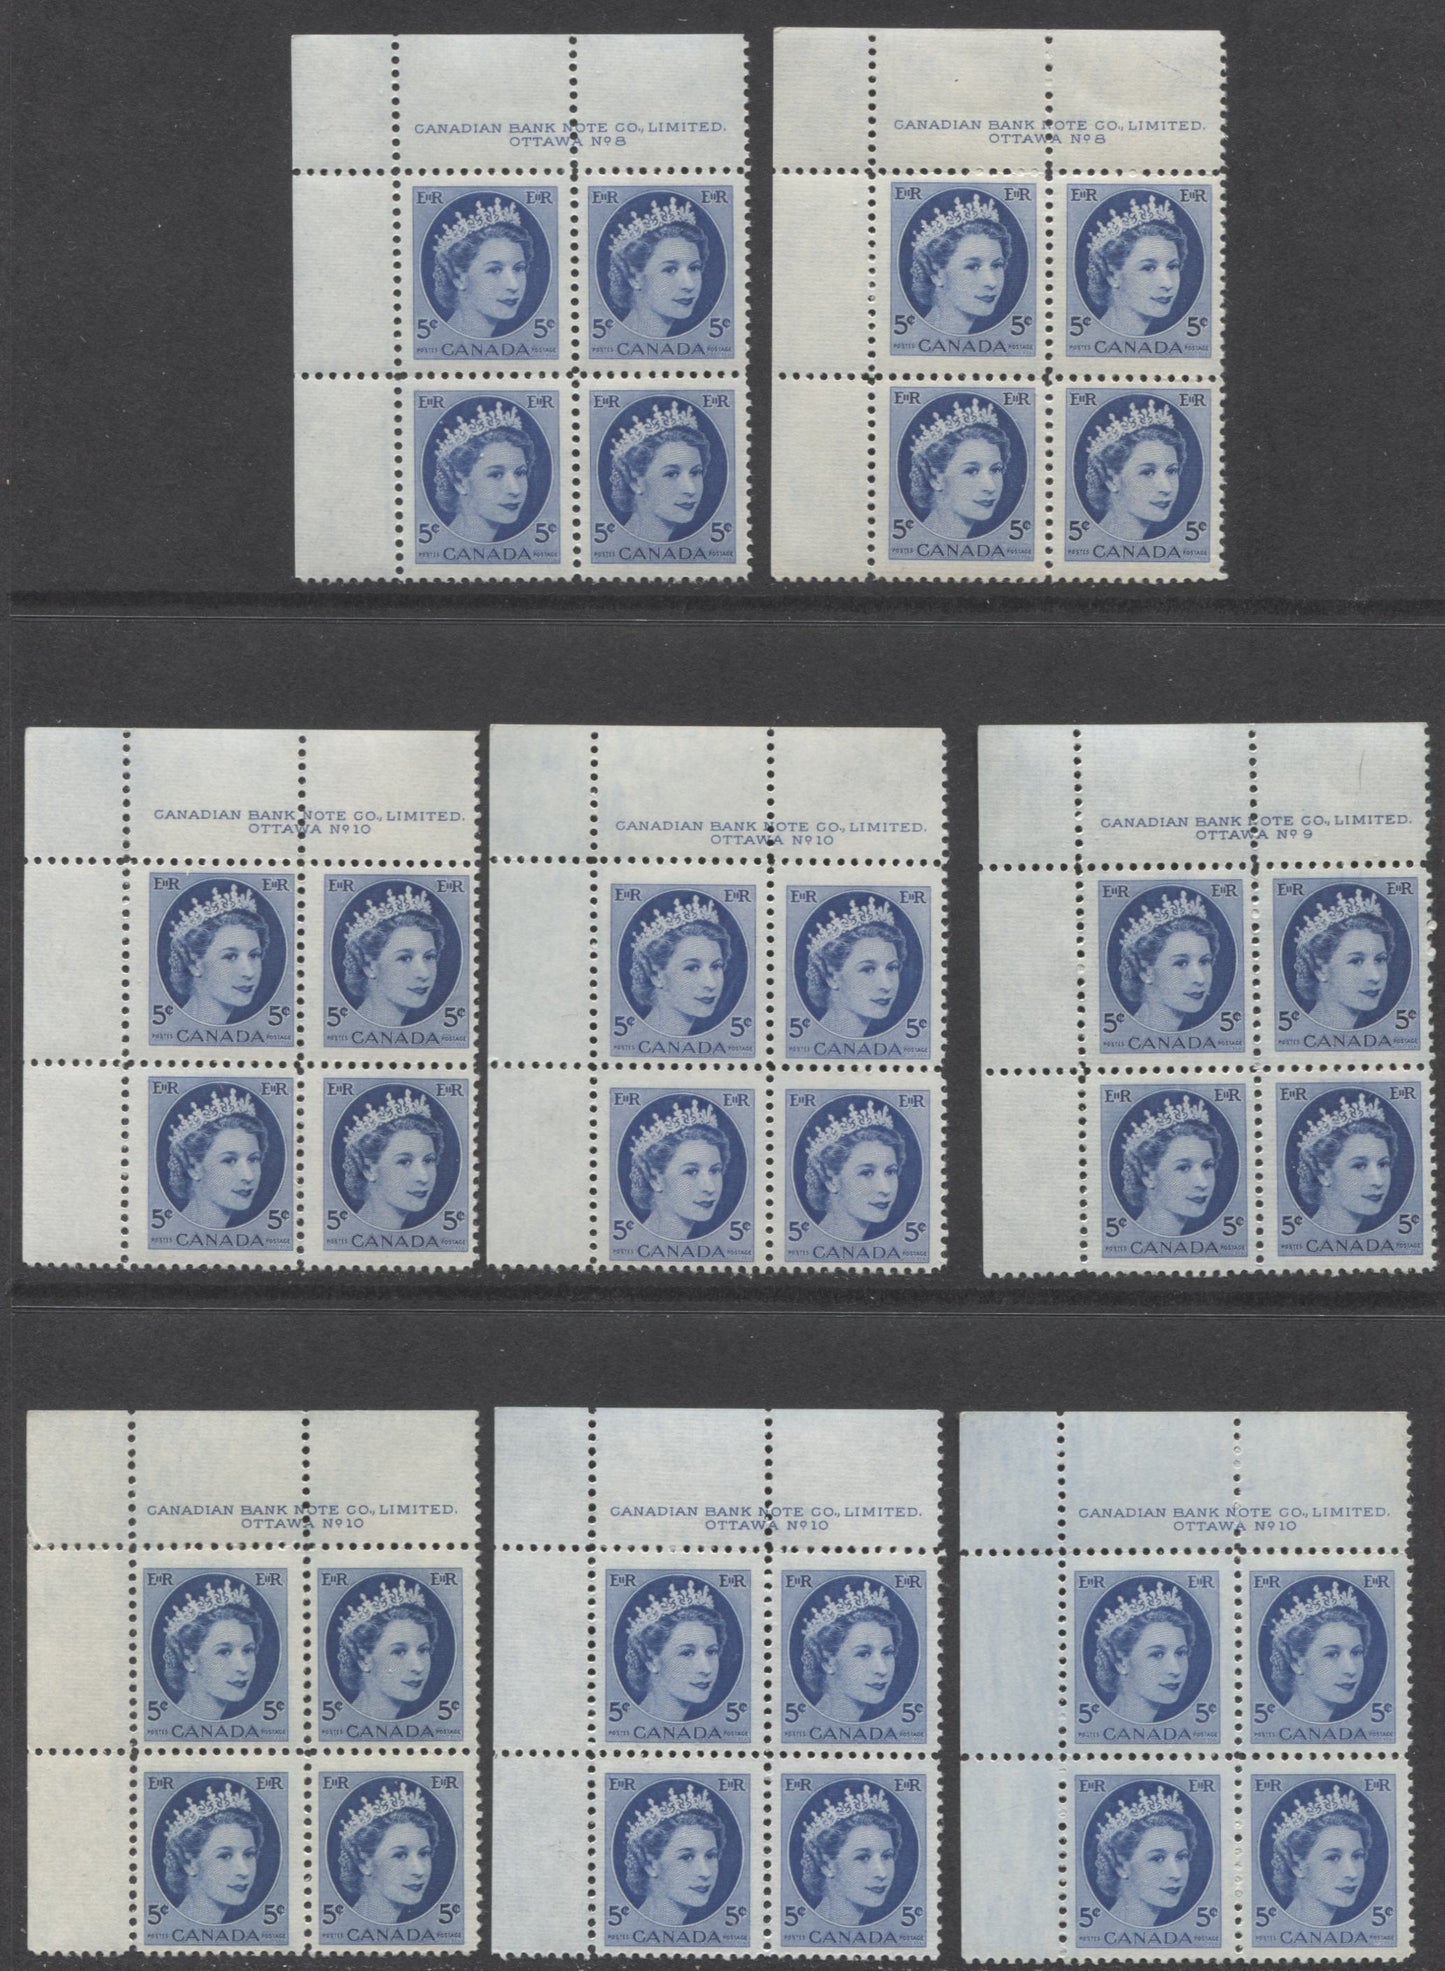 Lot 92 Canada #341 5c Bright Blue, 1954 Queen Elizabeth 2 - Wilding Portrait Issue, 17 F-VF NH UL Plates 8-13 Blocks Of 4 All DF Paper, With Various Ribbed & Smooth Papers And Shades